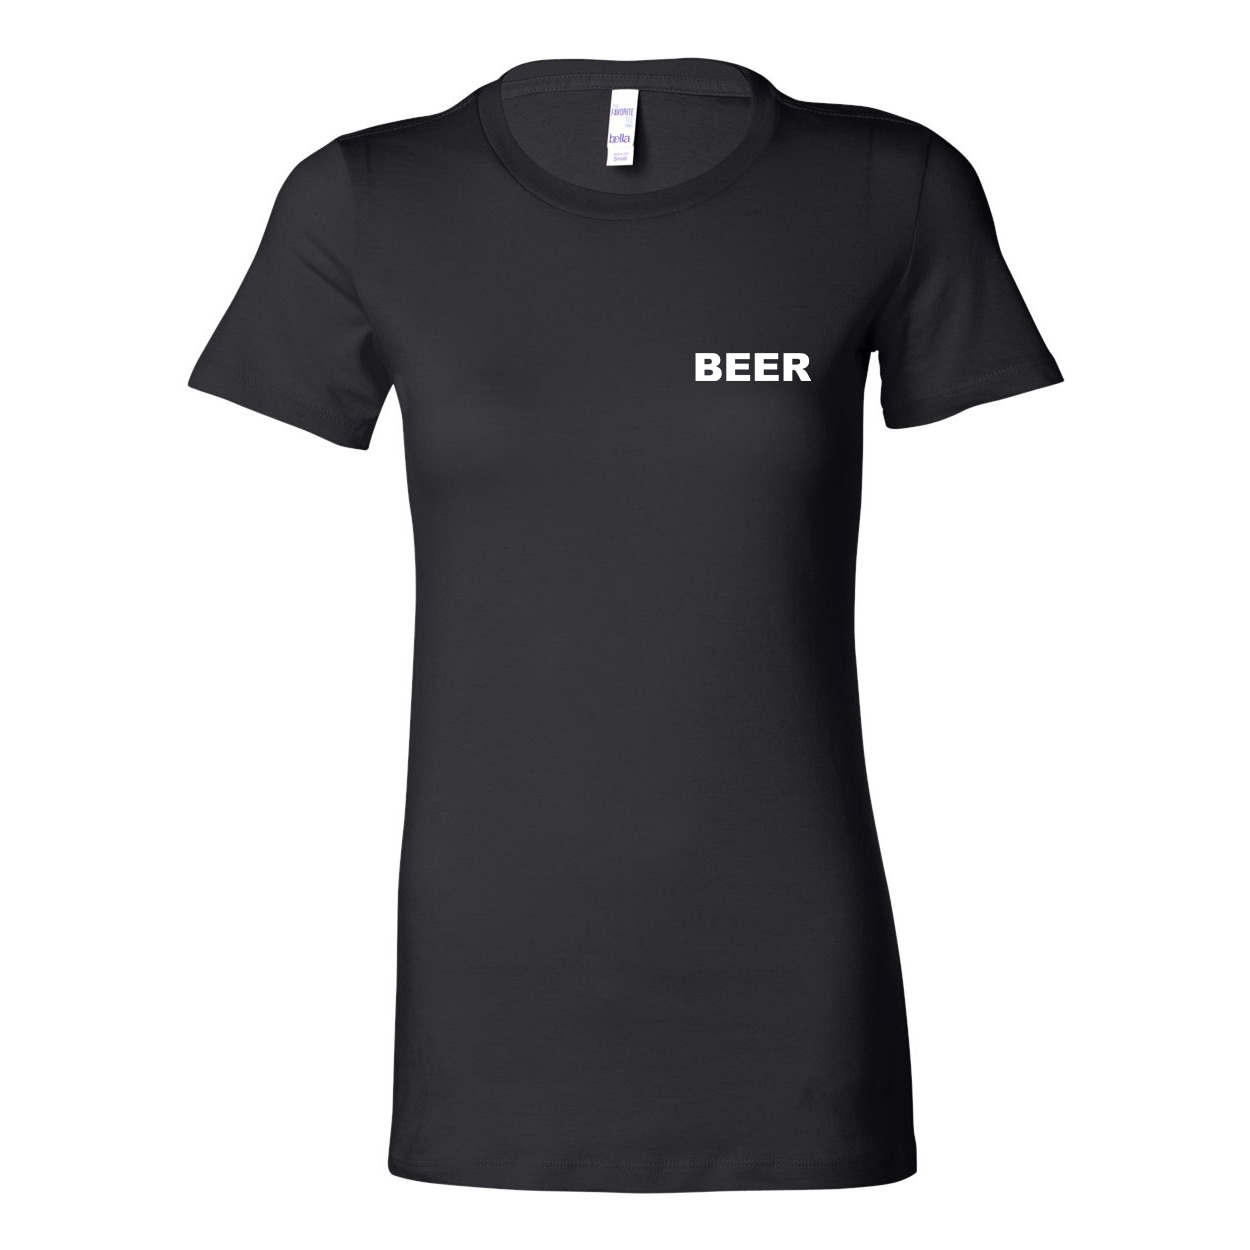 Beer Brand Logo Women's Night Out Fitted Tri-Blend T-Shirt Black